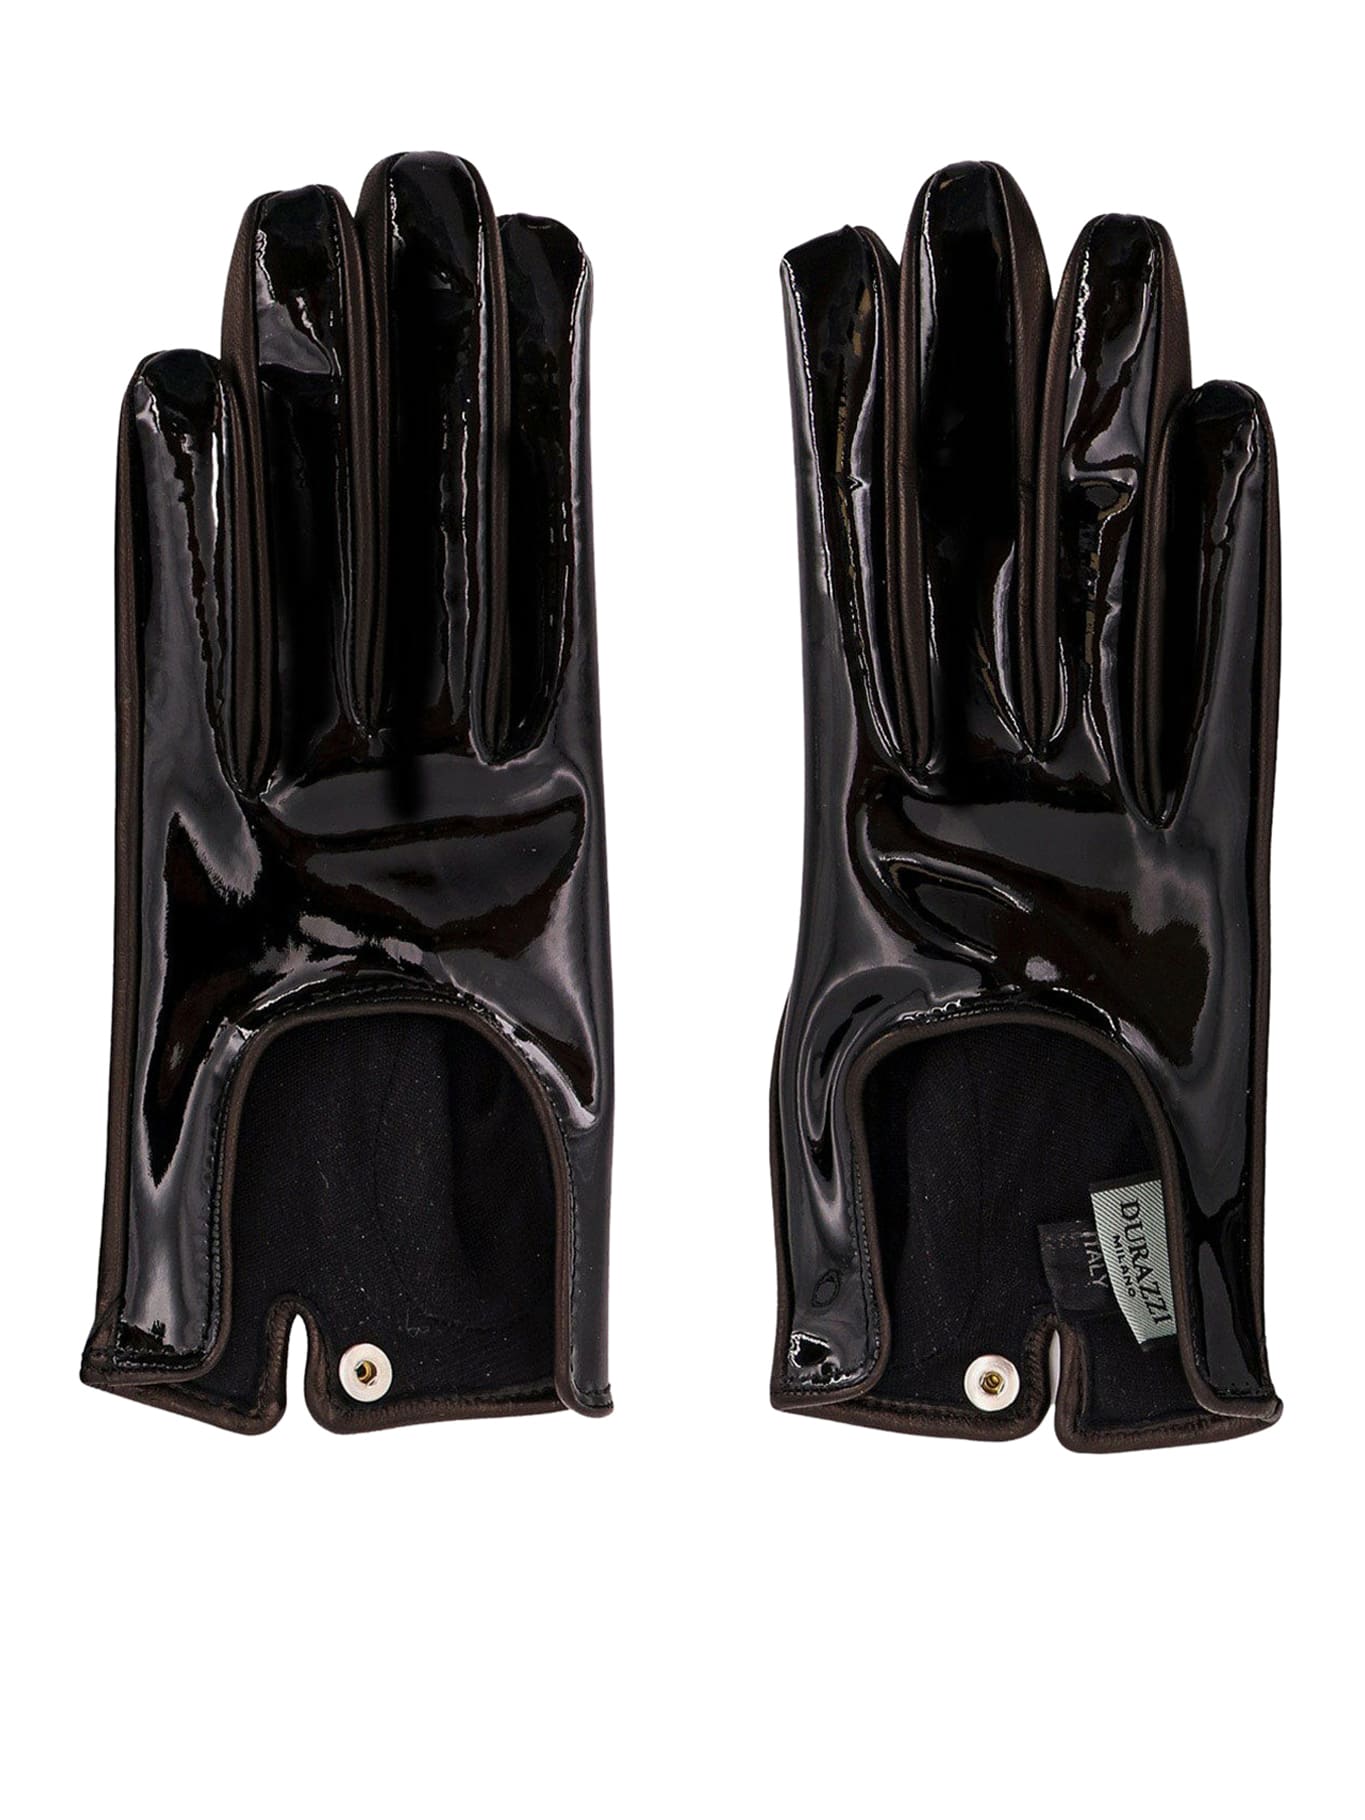 Patent And Calfskin Leather Gloves. Silk Lining